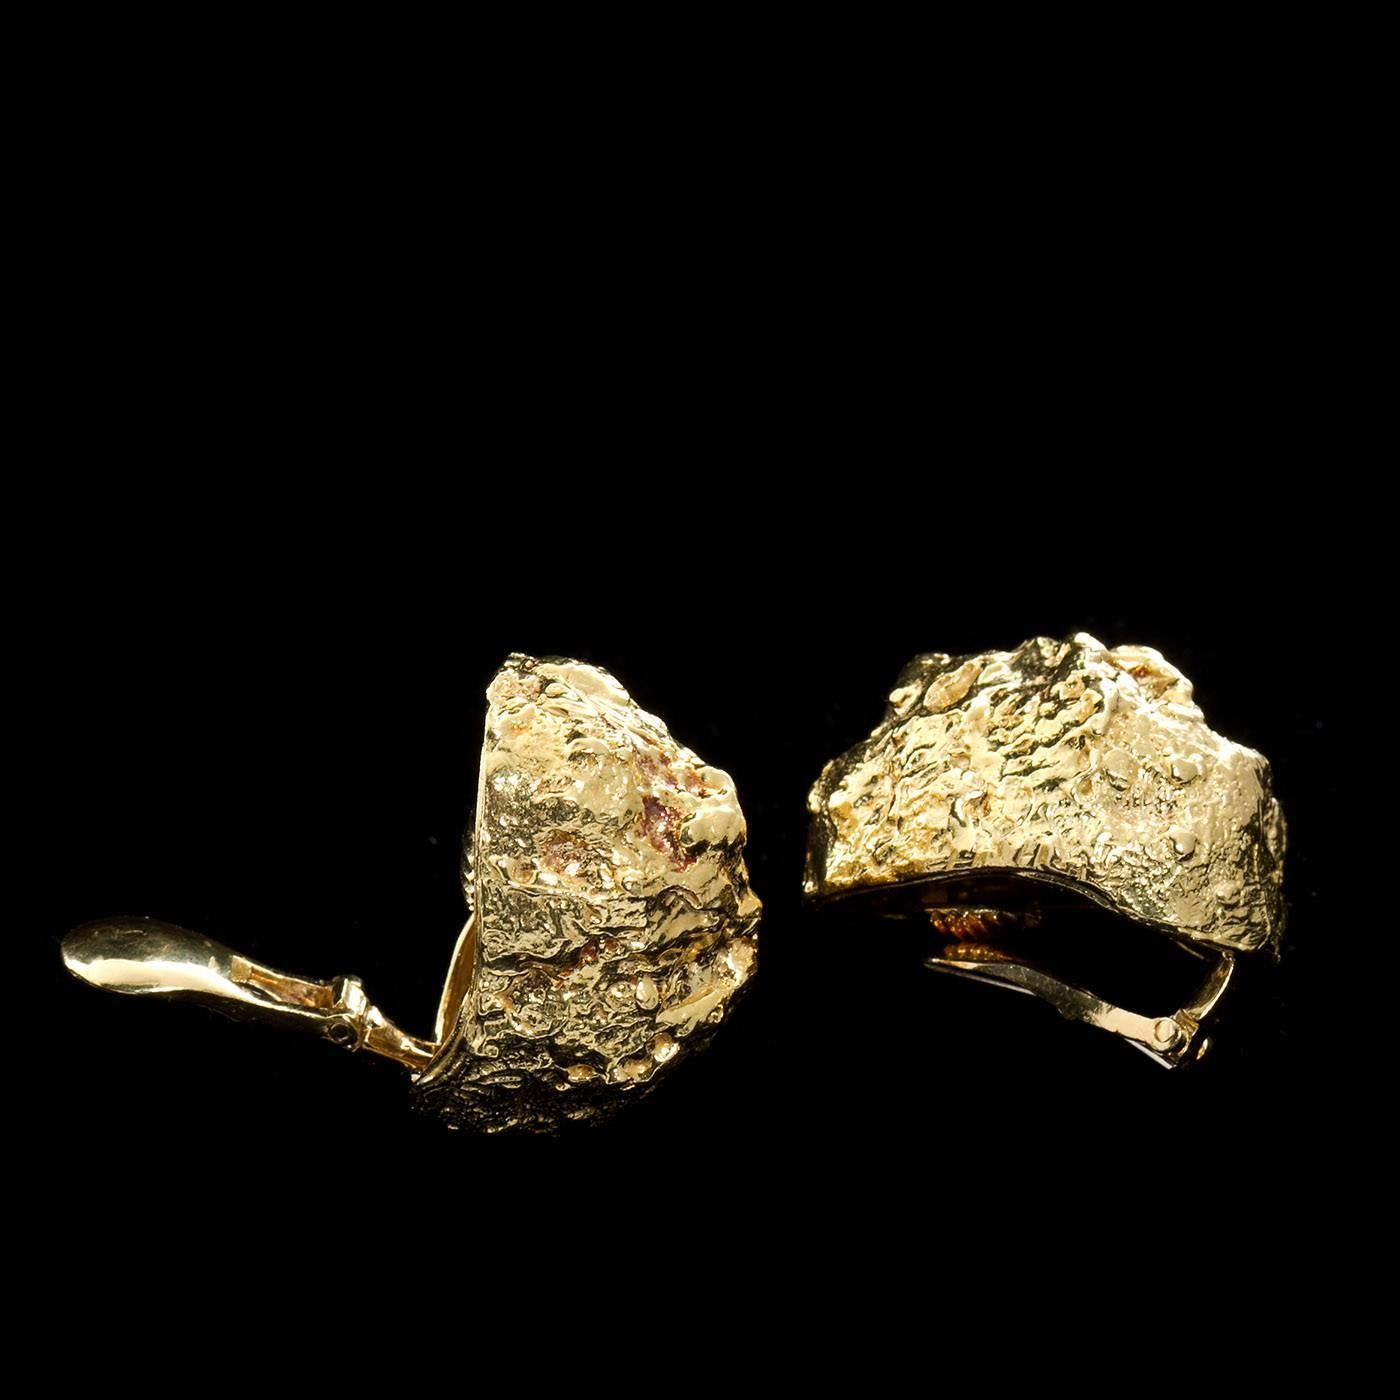 A pair of large 18 karat dome shaped gold nugget style ear clips by David Webb. Each approx. 1-1/8 x 7/8 inches. 28.7 dwt. (Note: These are the larger style, the smaller pair are only 18 dwt)

No. TMWJ-6284